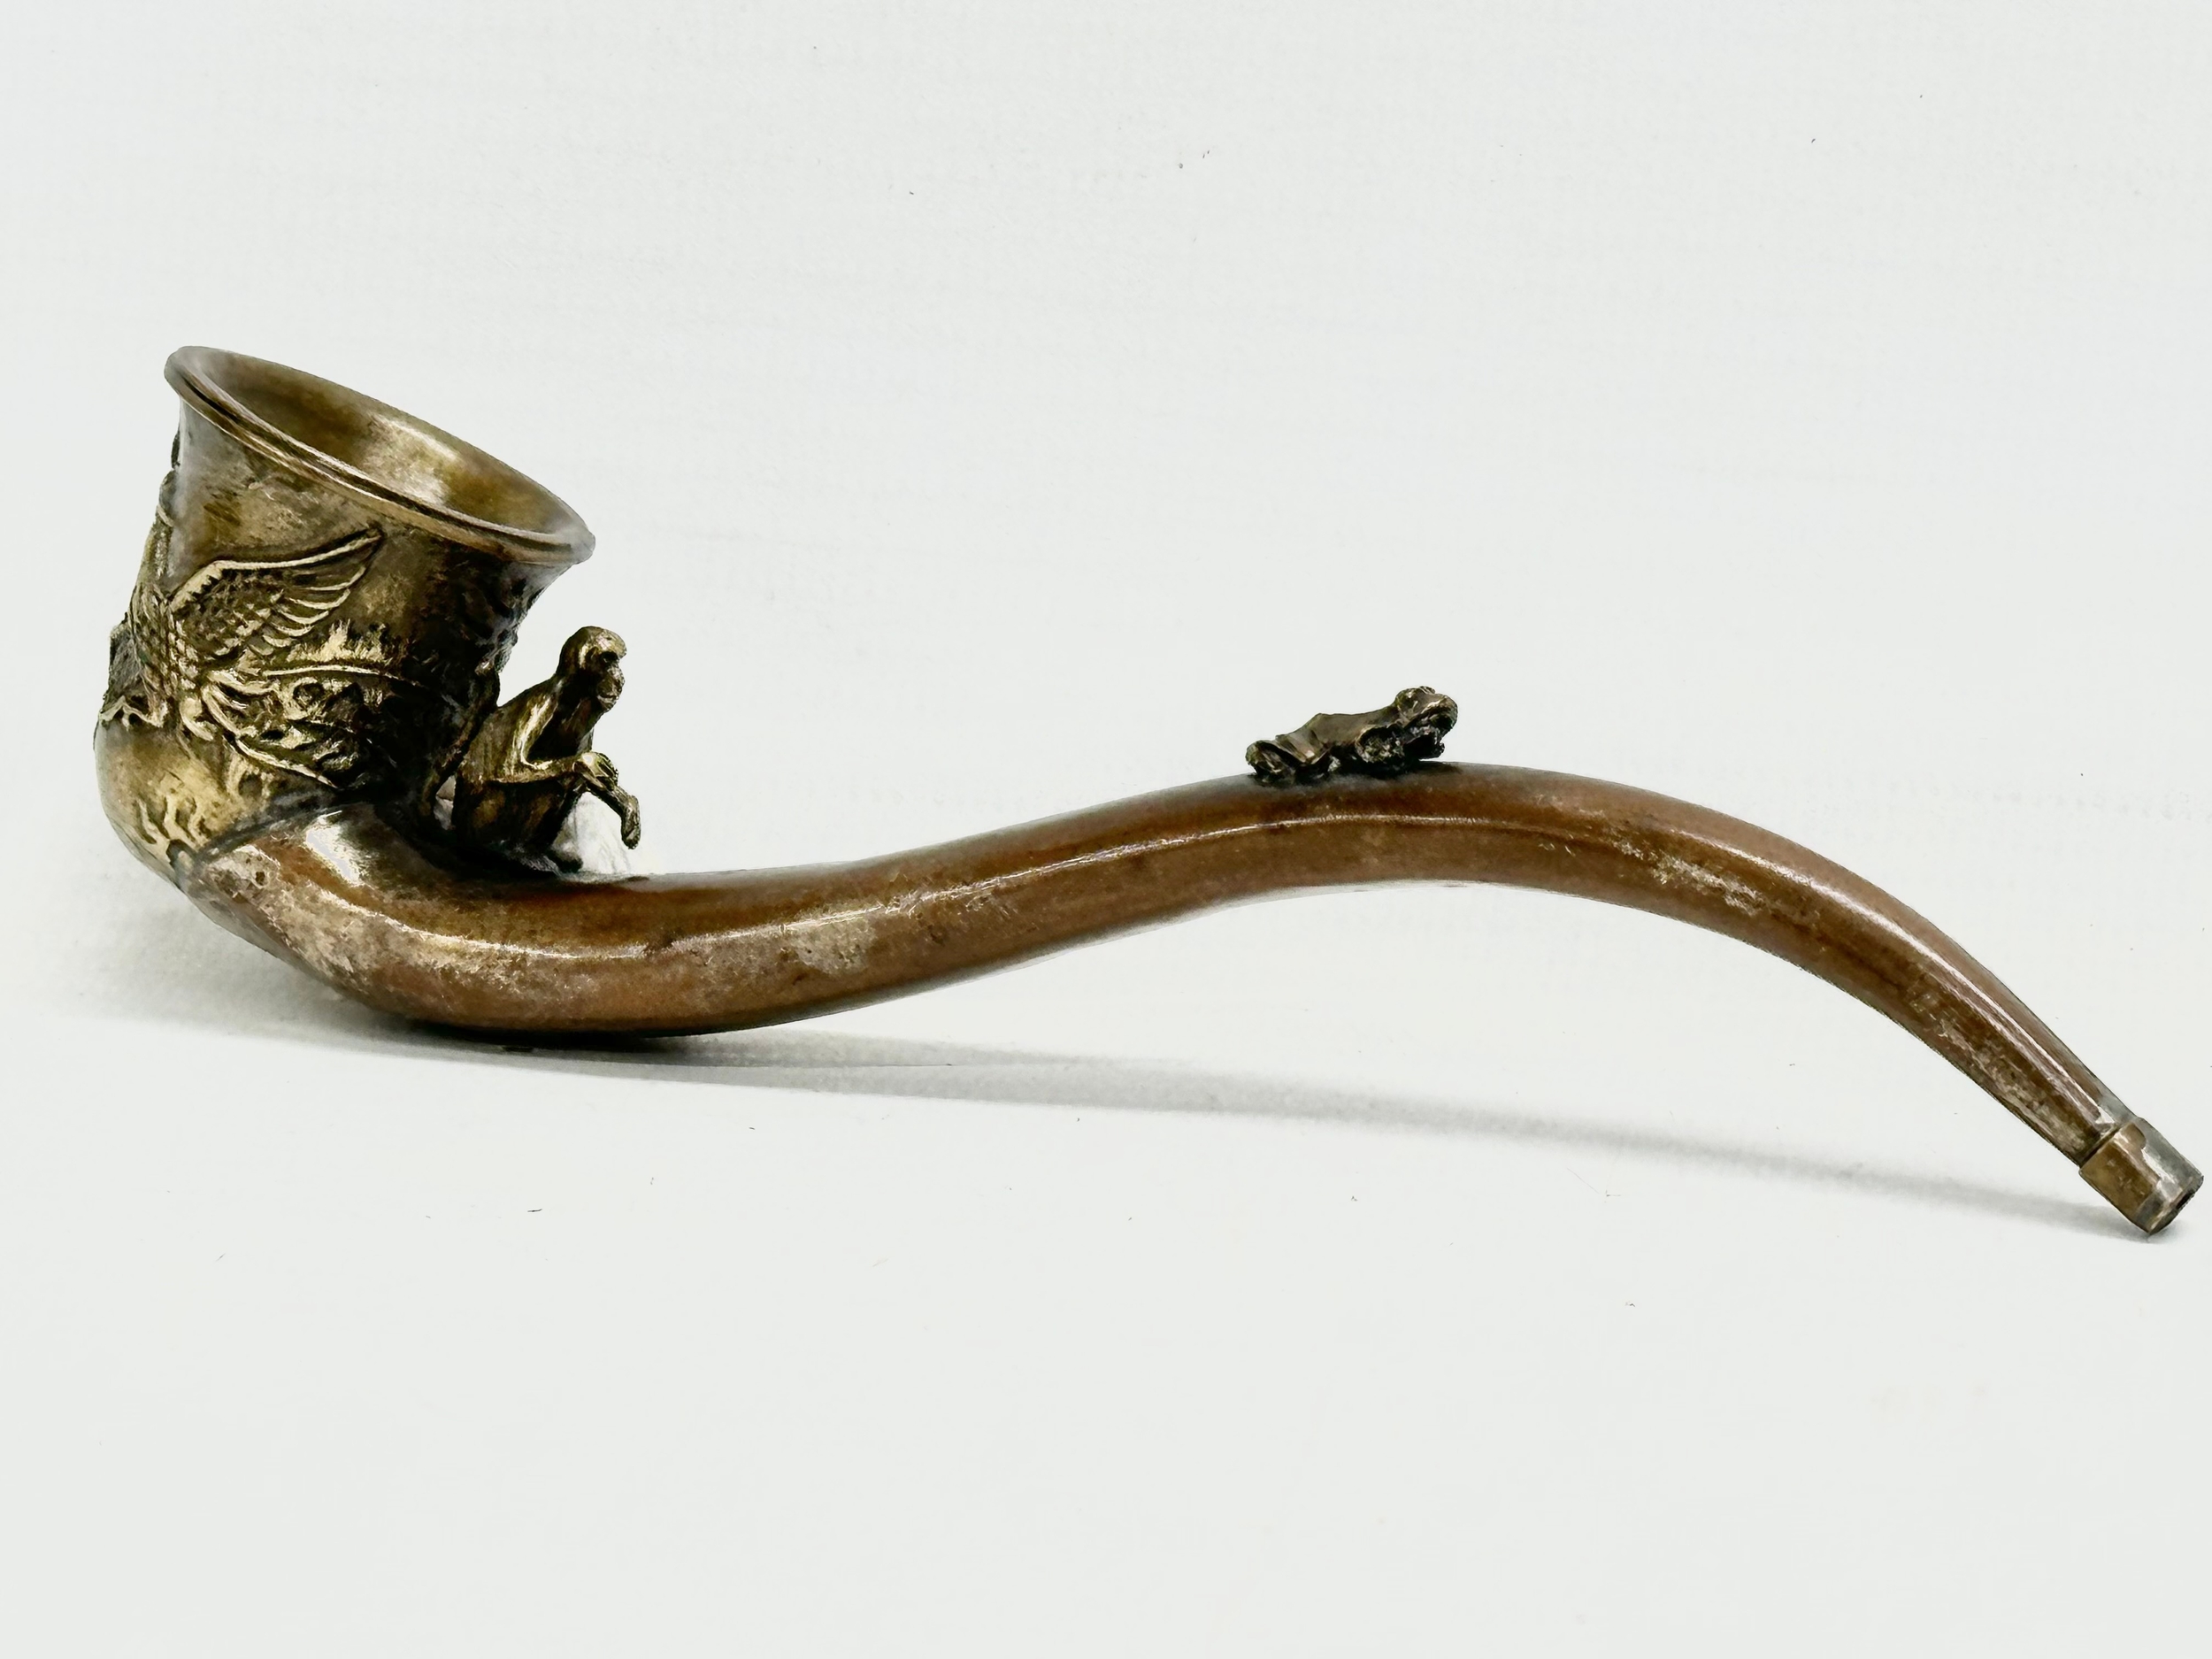 An early 20th century Chinese novelty dragon design opium pipe, with good quality carved monkey